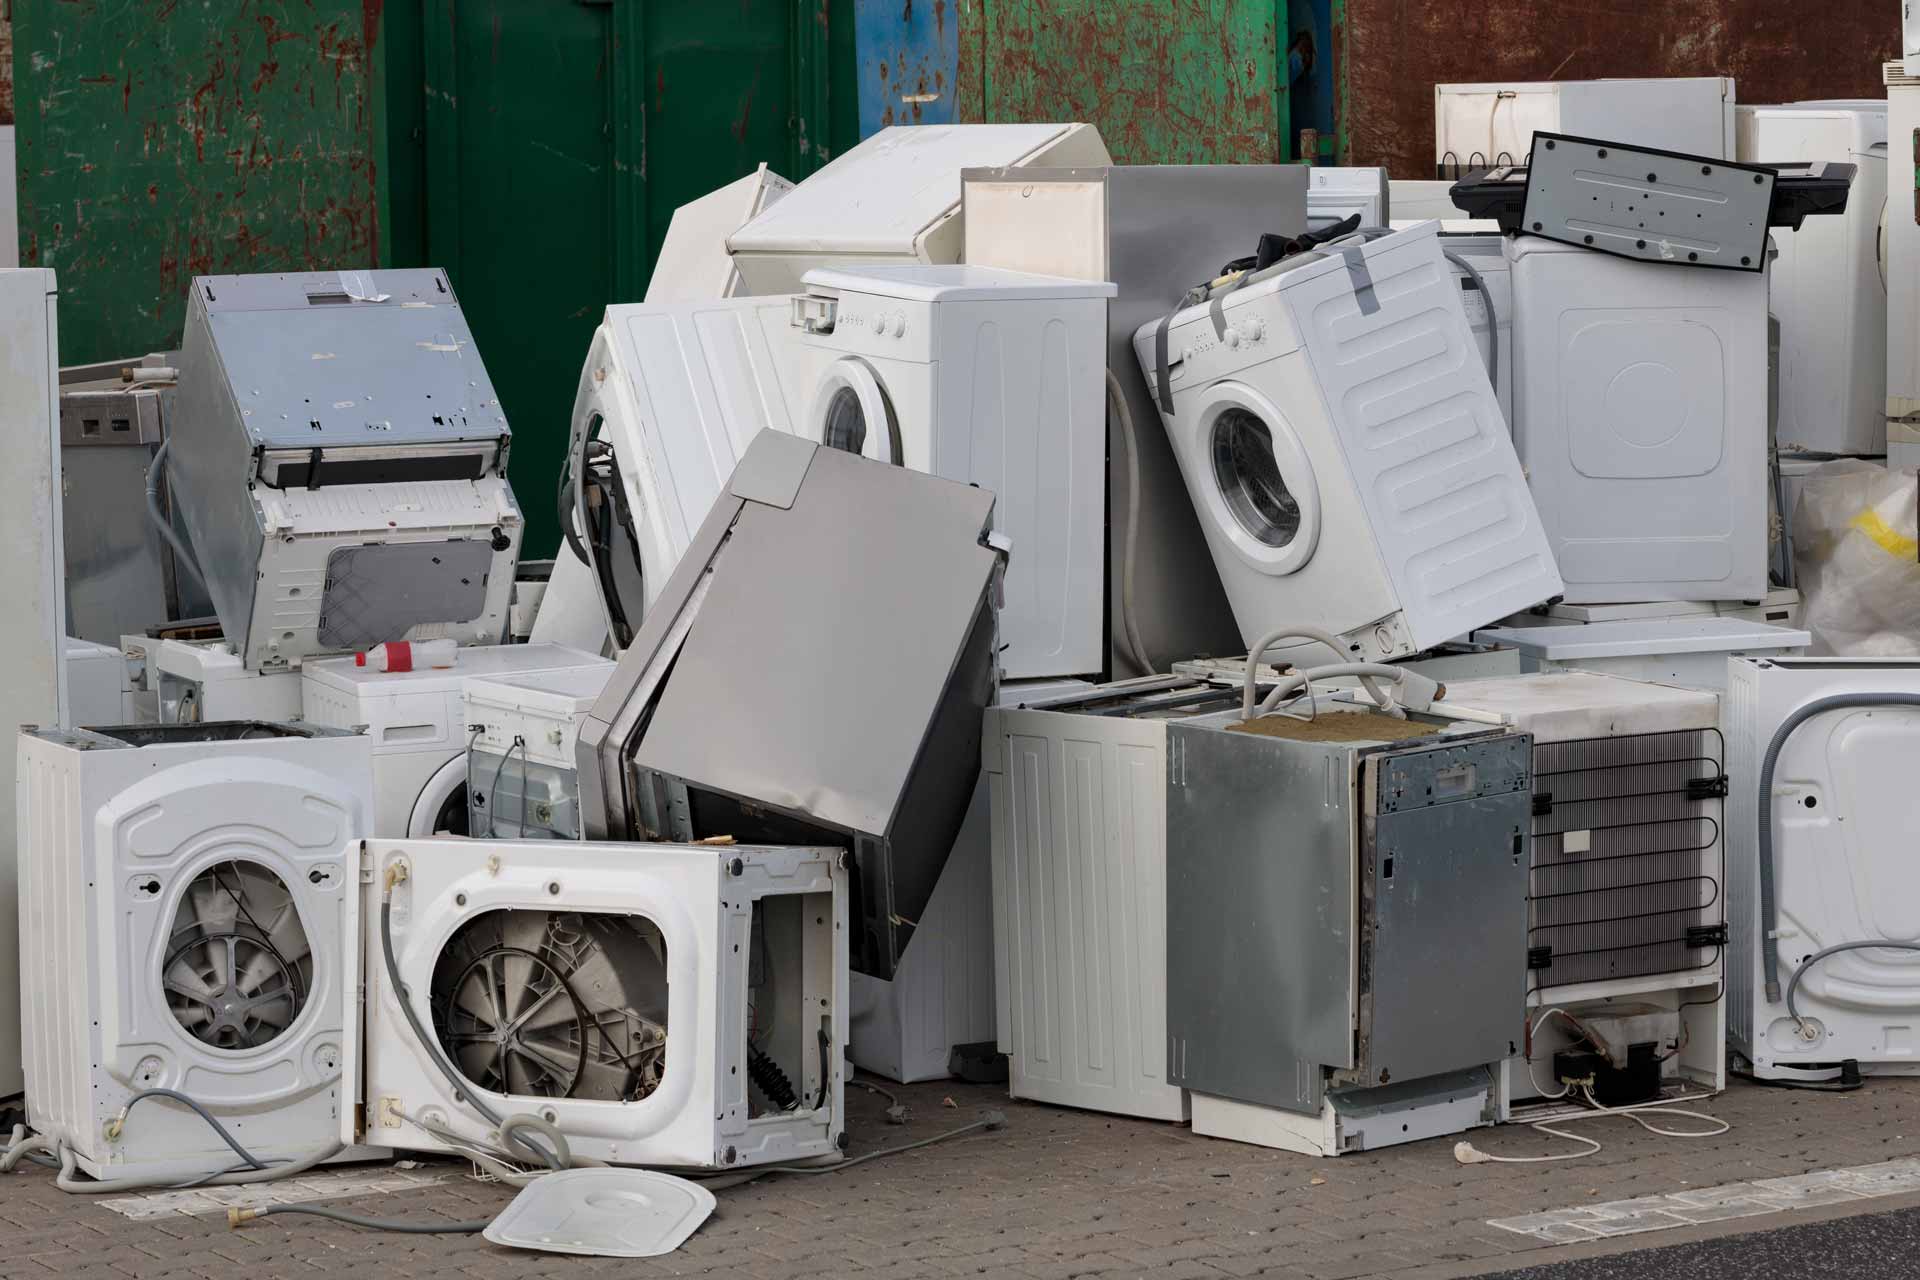 A variety of old home appliances in a heap at the dump